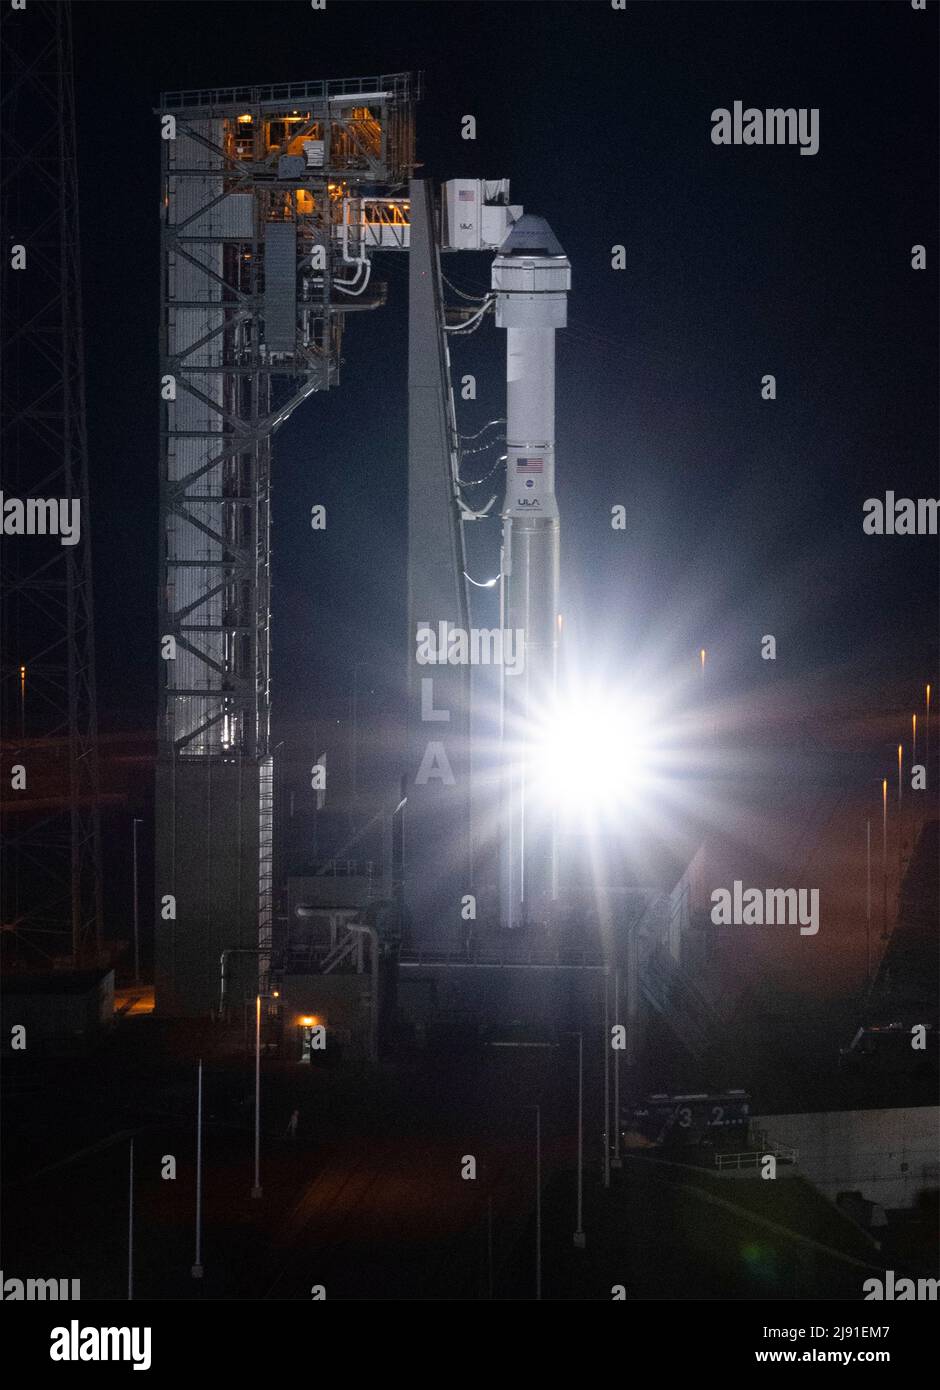 Cape Canaveral, United States of America. 18 May, 2022. The United Launch Alliance Atlas V rocket carrying the Boeing CST-100 Starliner spacecraft aboard illuminated by spotlights at Space Launch Complex 41 ahead of the Orbital Flight Test-2 mission at Cape Canaveral Space Force Station, May 18, 2022 in Cape Canaveral, Florida. The Flight Test-2 will be second un-crewed flight test and will dock to the International Space Station. Credit: Joel Kowsky/NASA/Alamy Live News Stock Photo